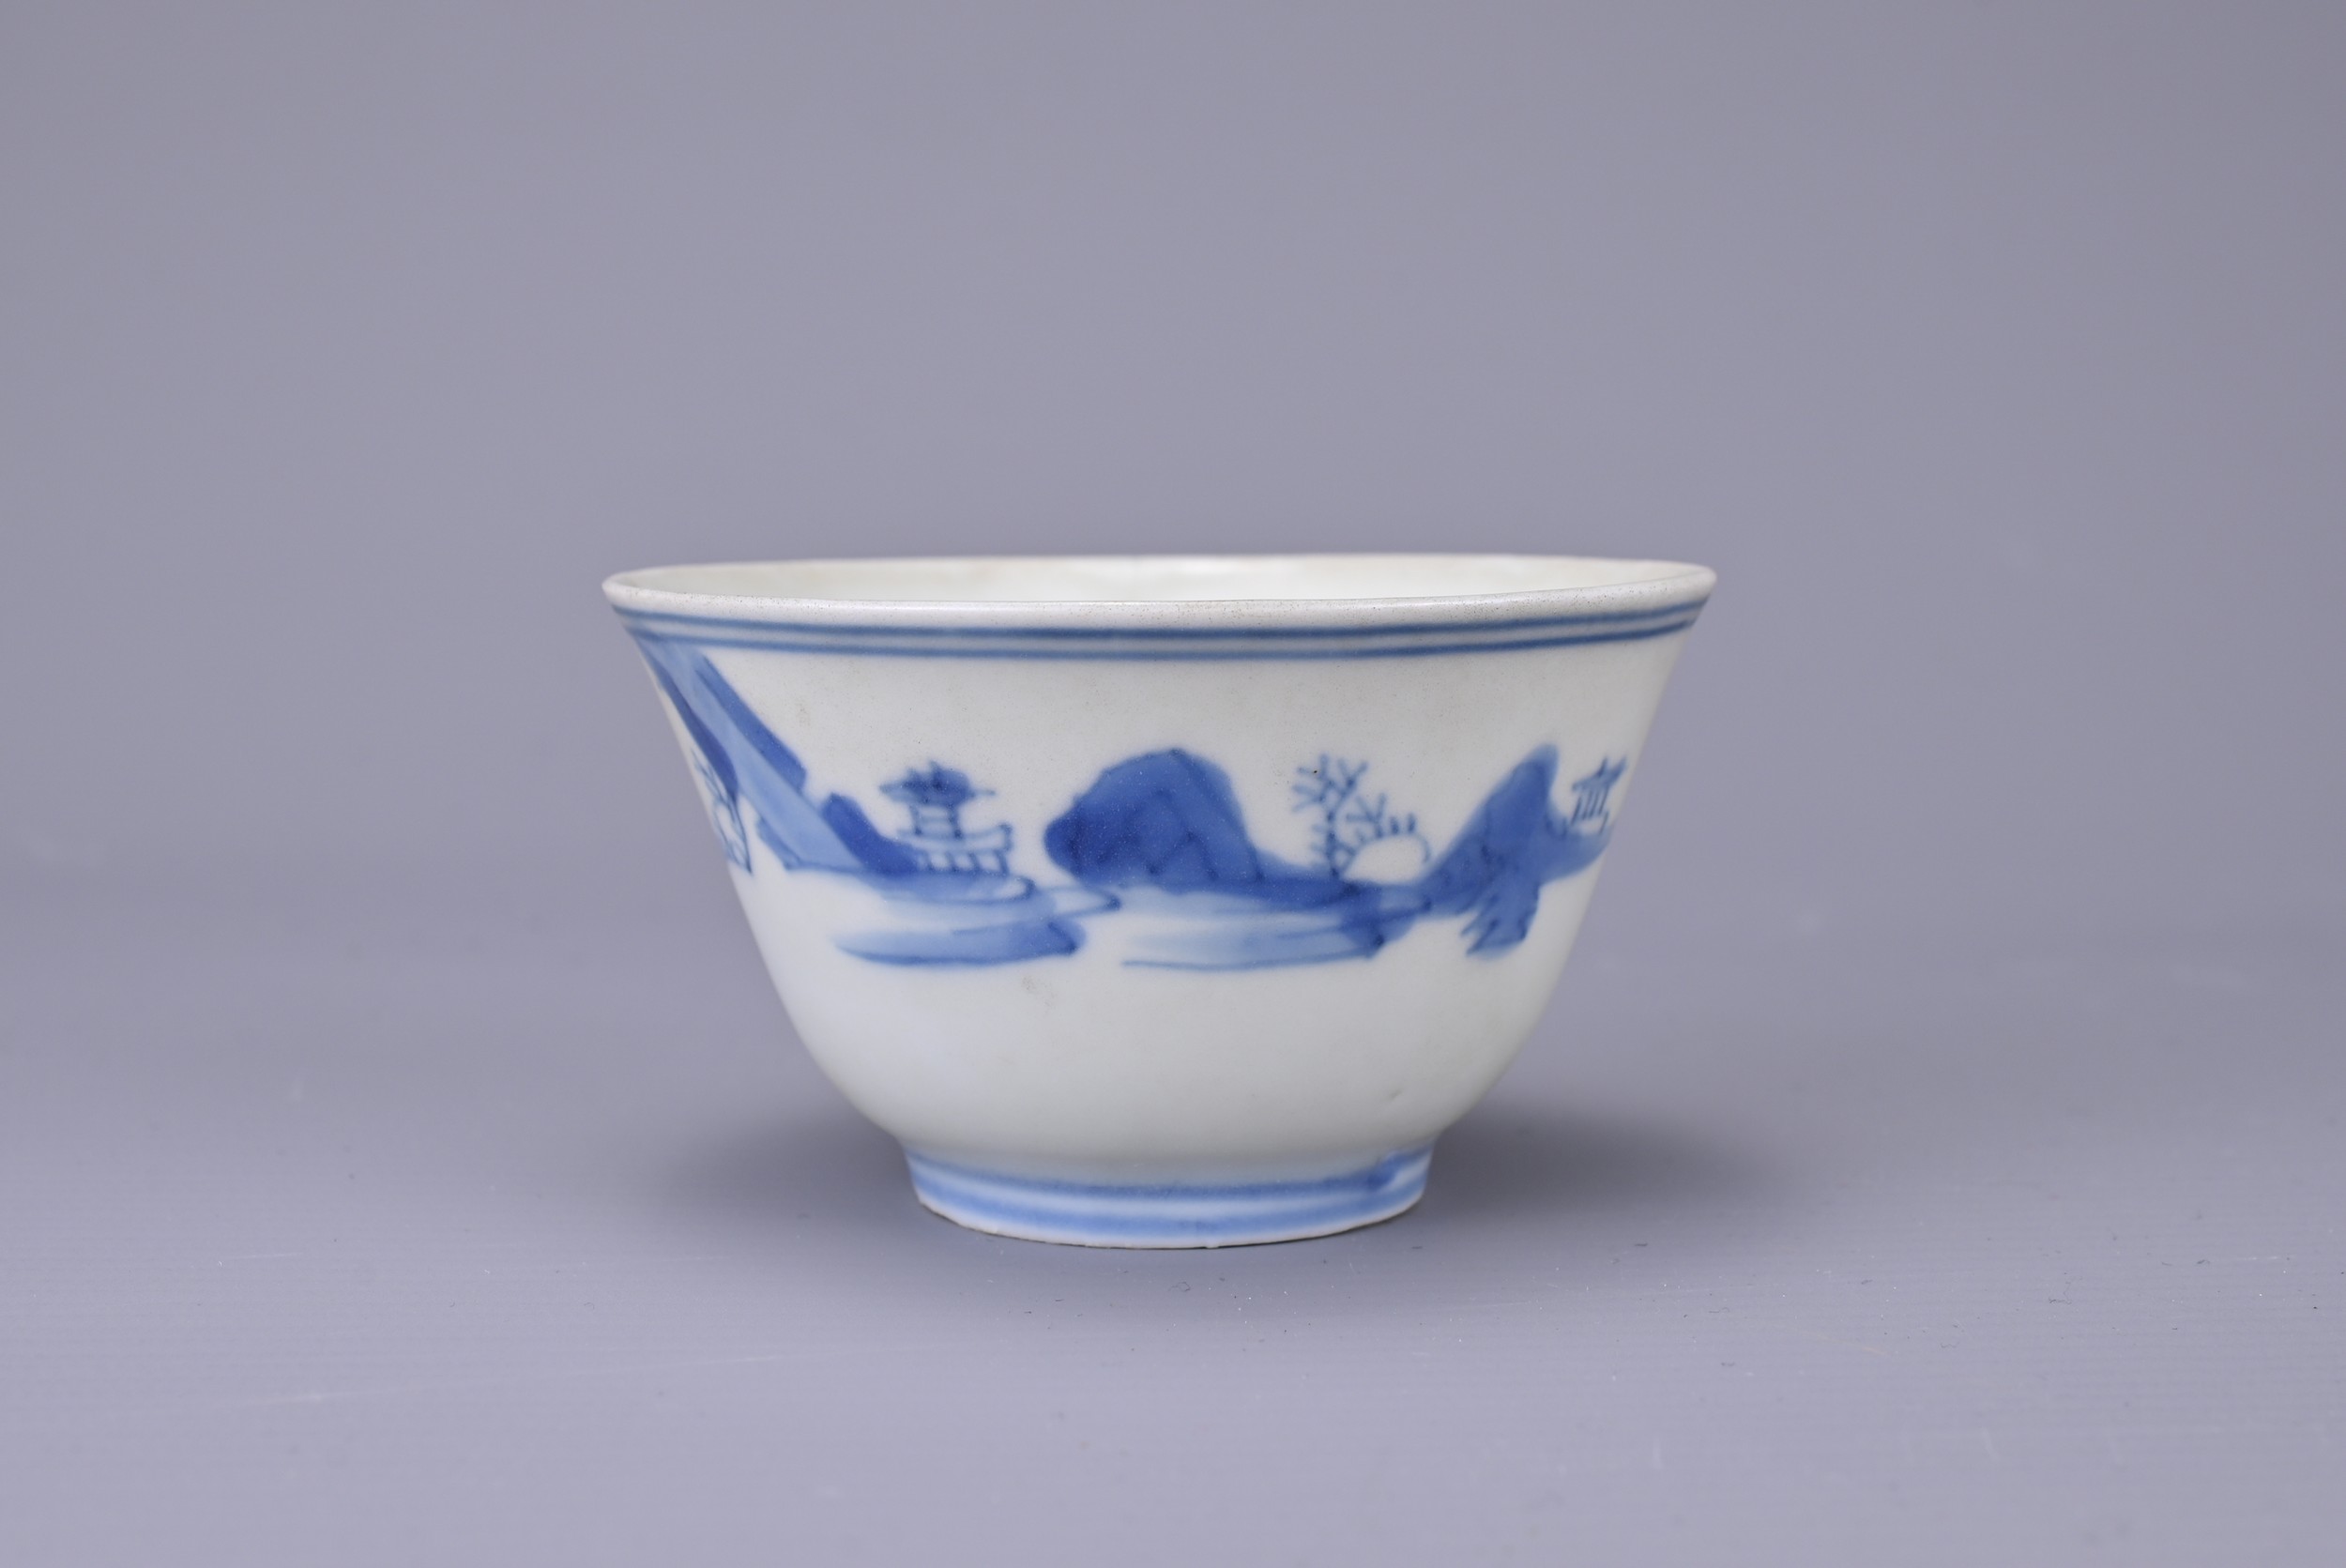 A CHINESE BLUE AND WHITE PORCELAIN CUP, CHENGHUA MARK. Decorated with boat in a coastal landscape